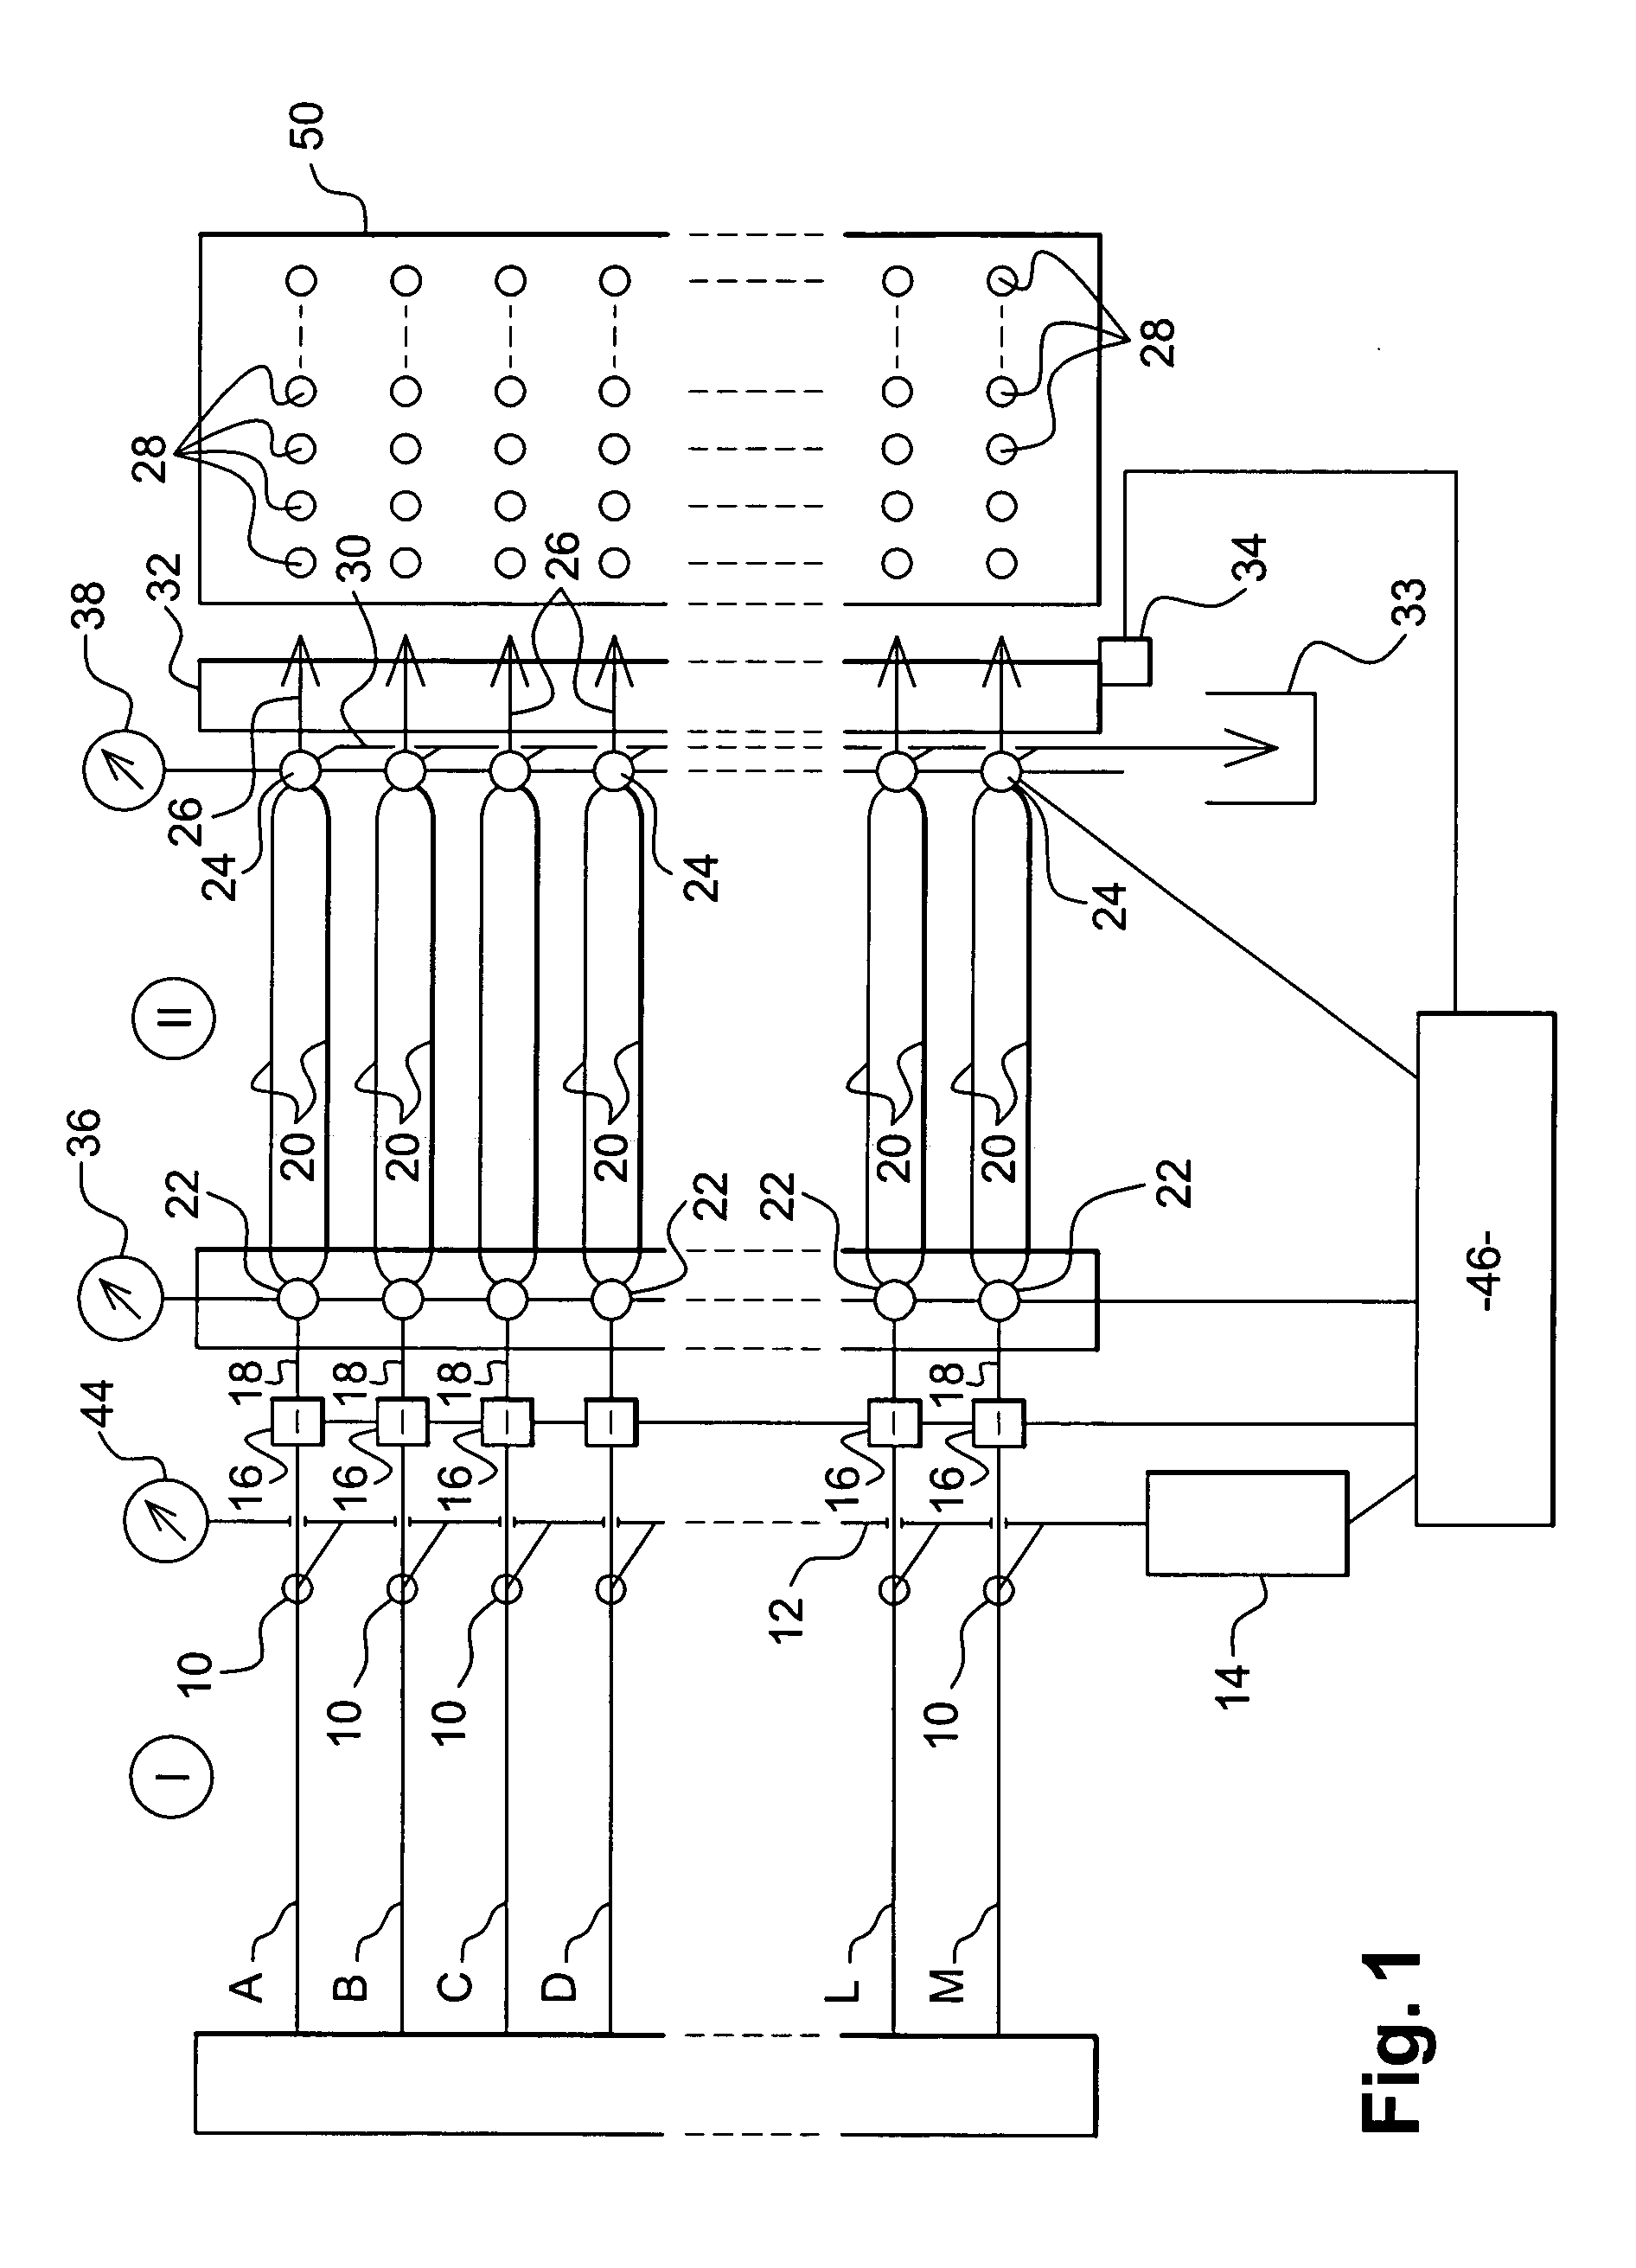 Installation for separating components in a plurality of parallel channels